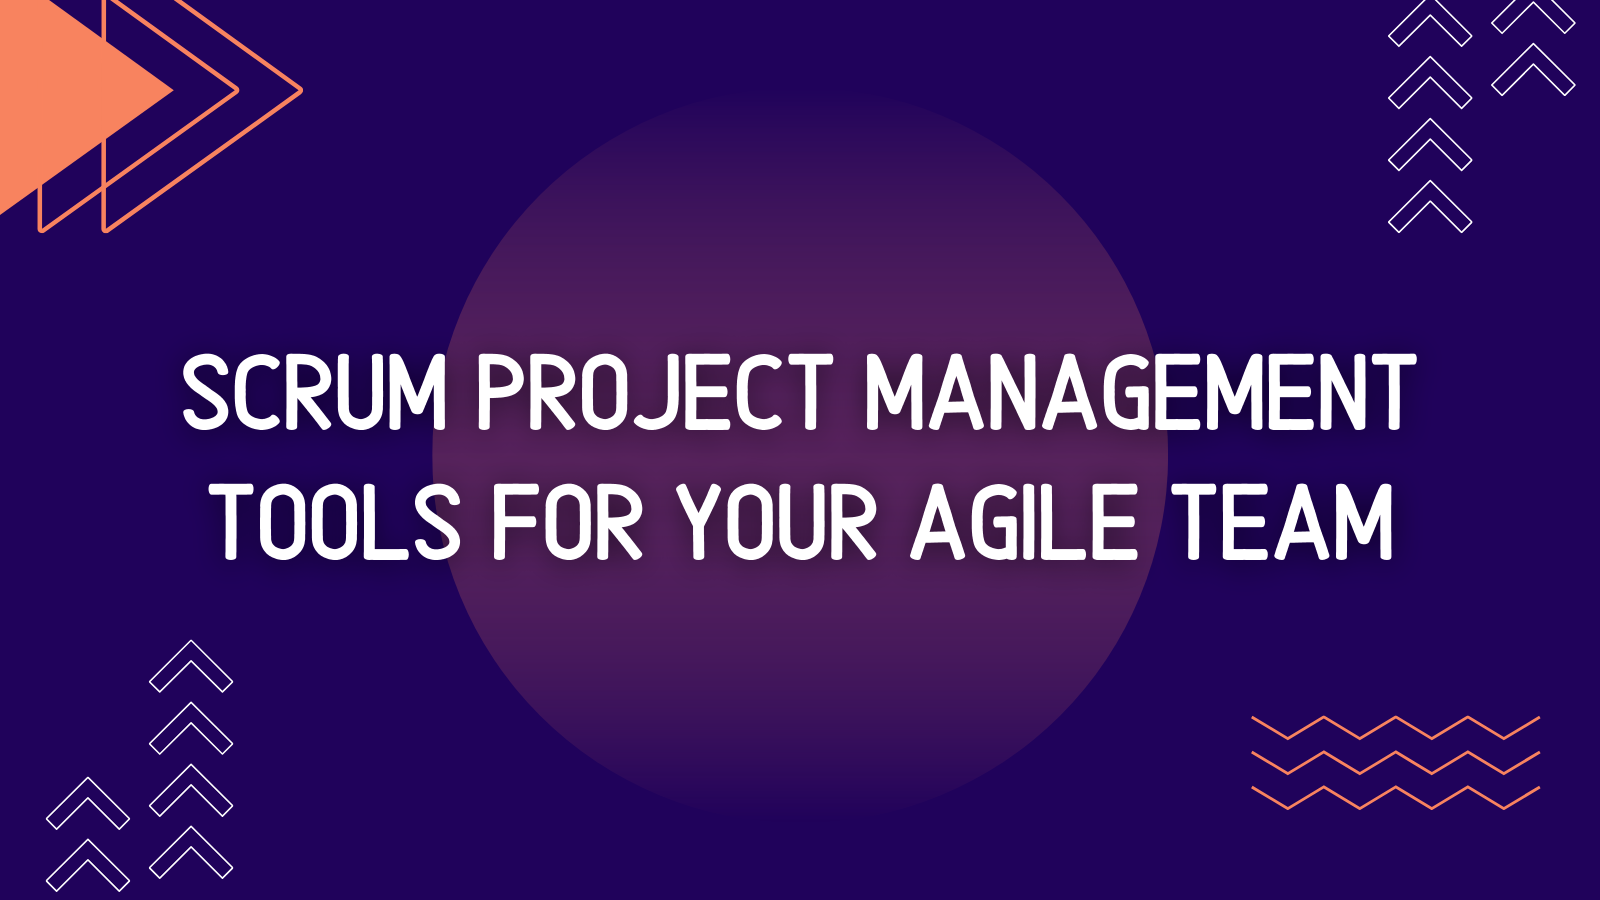 inflectra-scrum-project-management-tools-for-your-agile-team-image